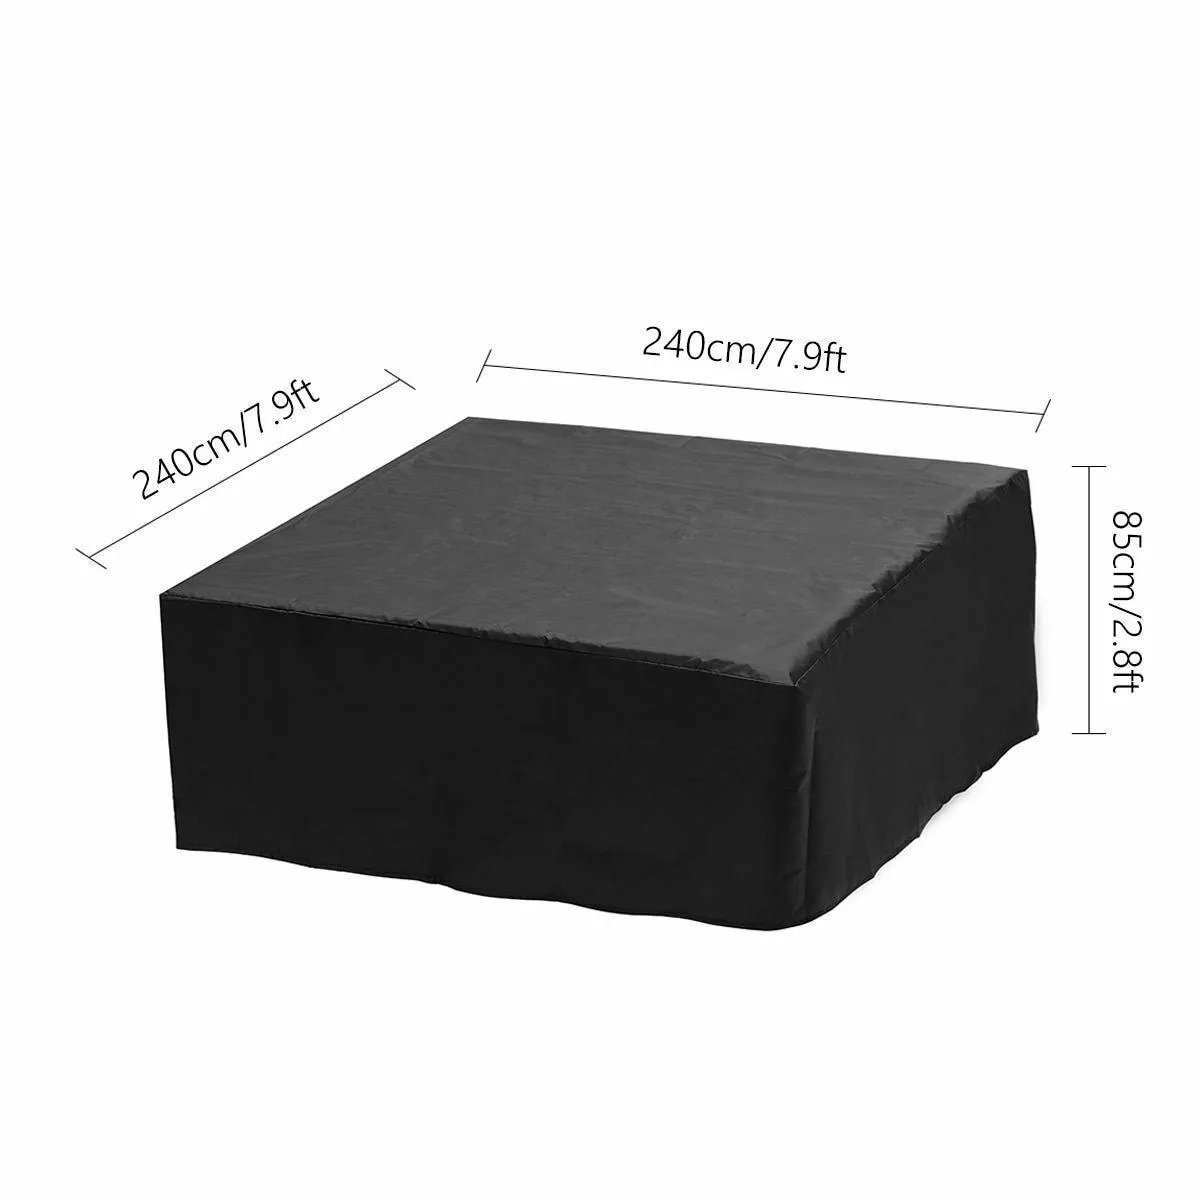 Universal Hot Tub Dust Cover Cap Waterproof Jacuzzi UV Proof All-Weather Spa Cover Cap Protector Hotspring Snow Rain Dust Covers